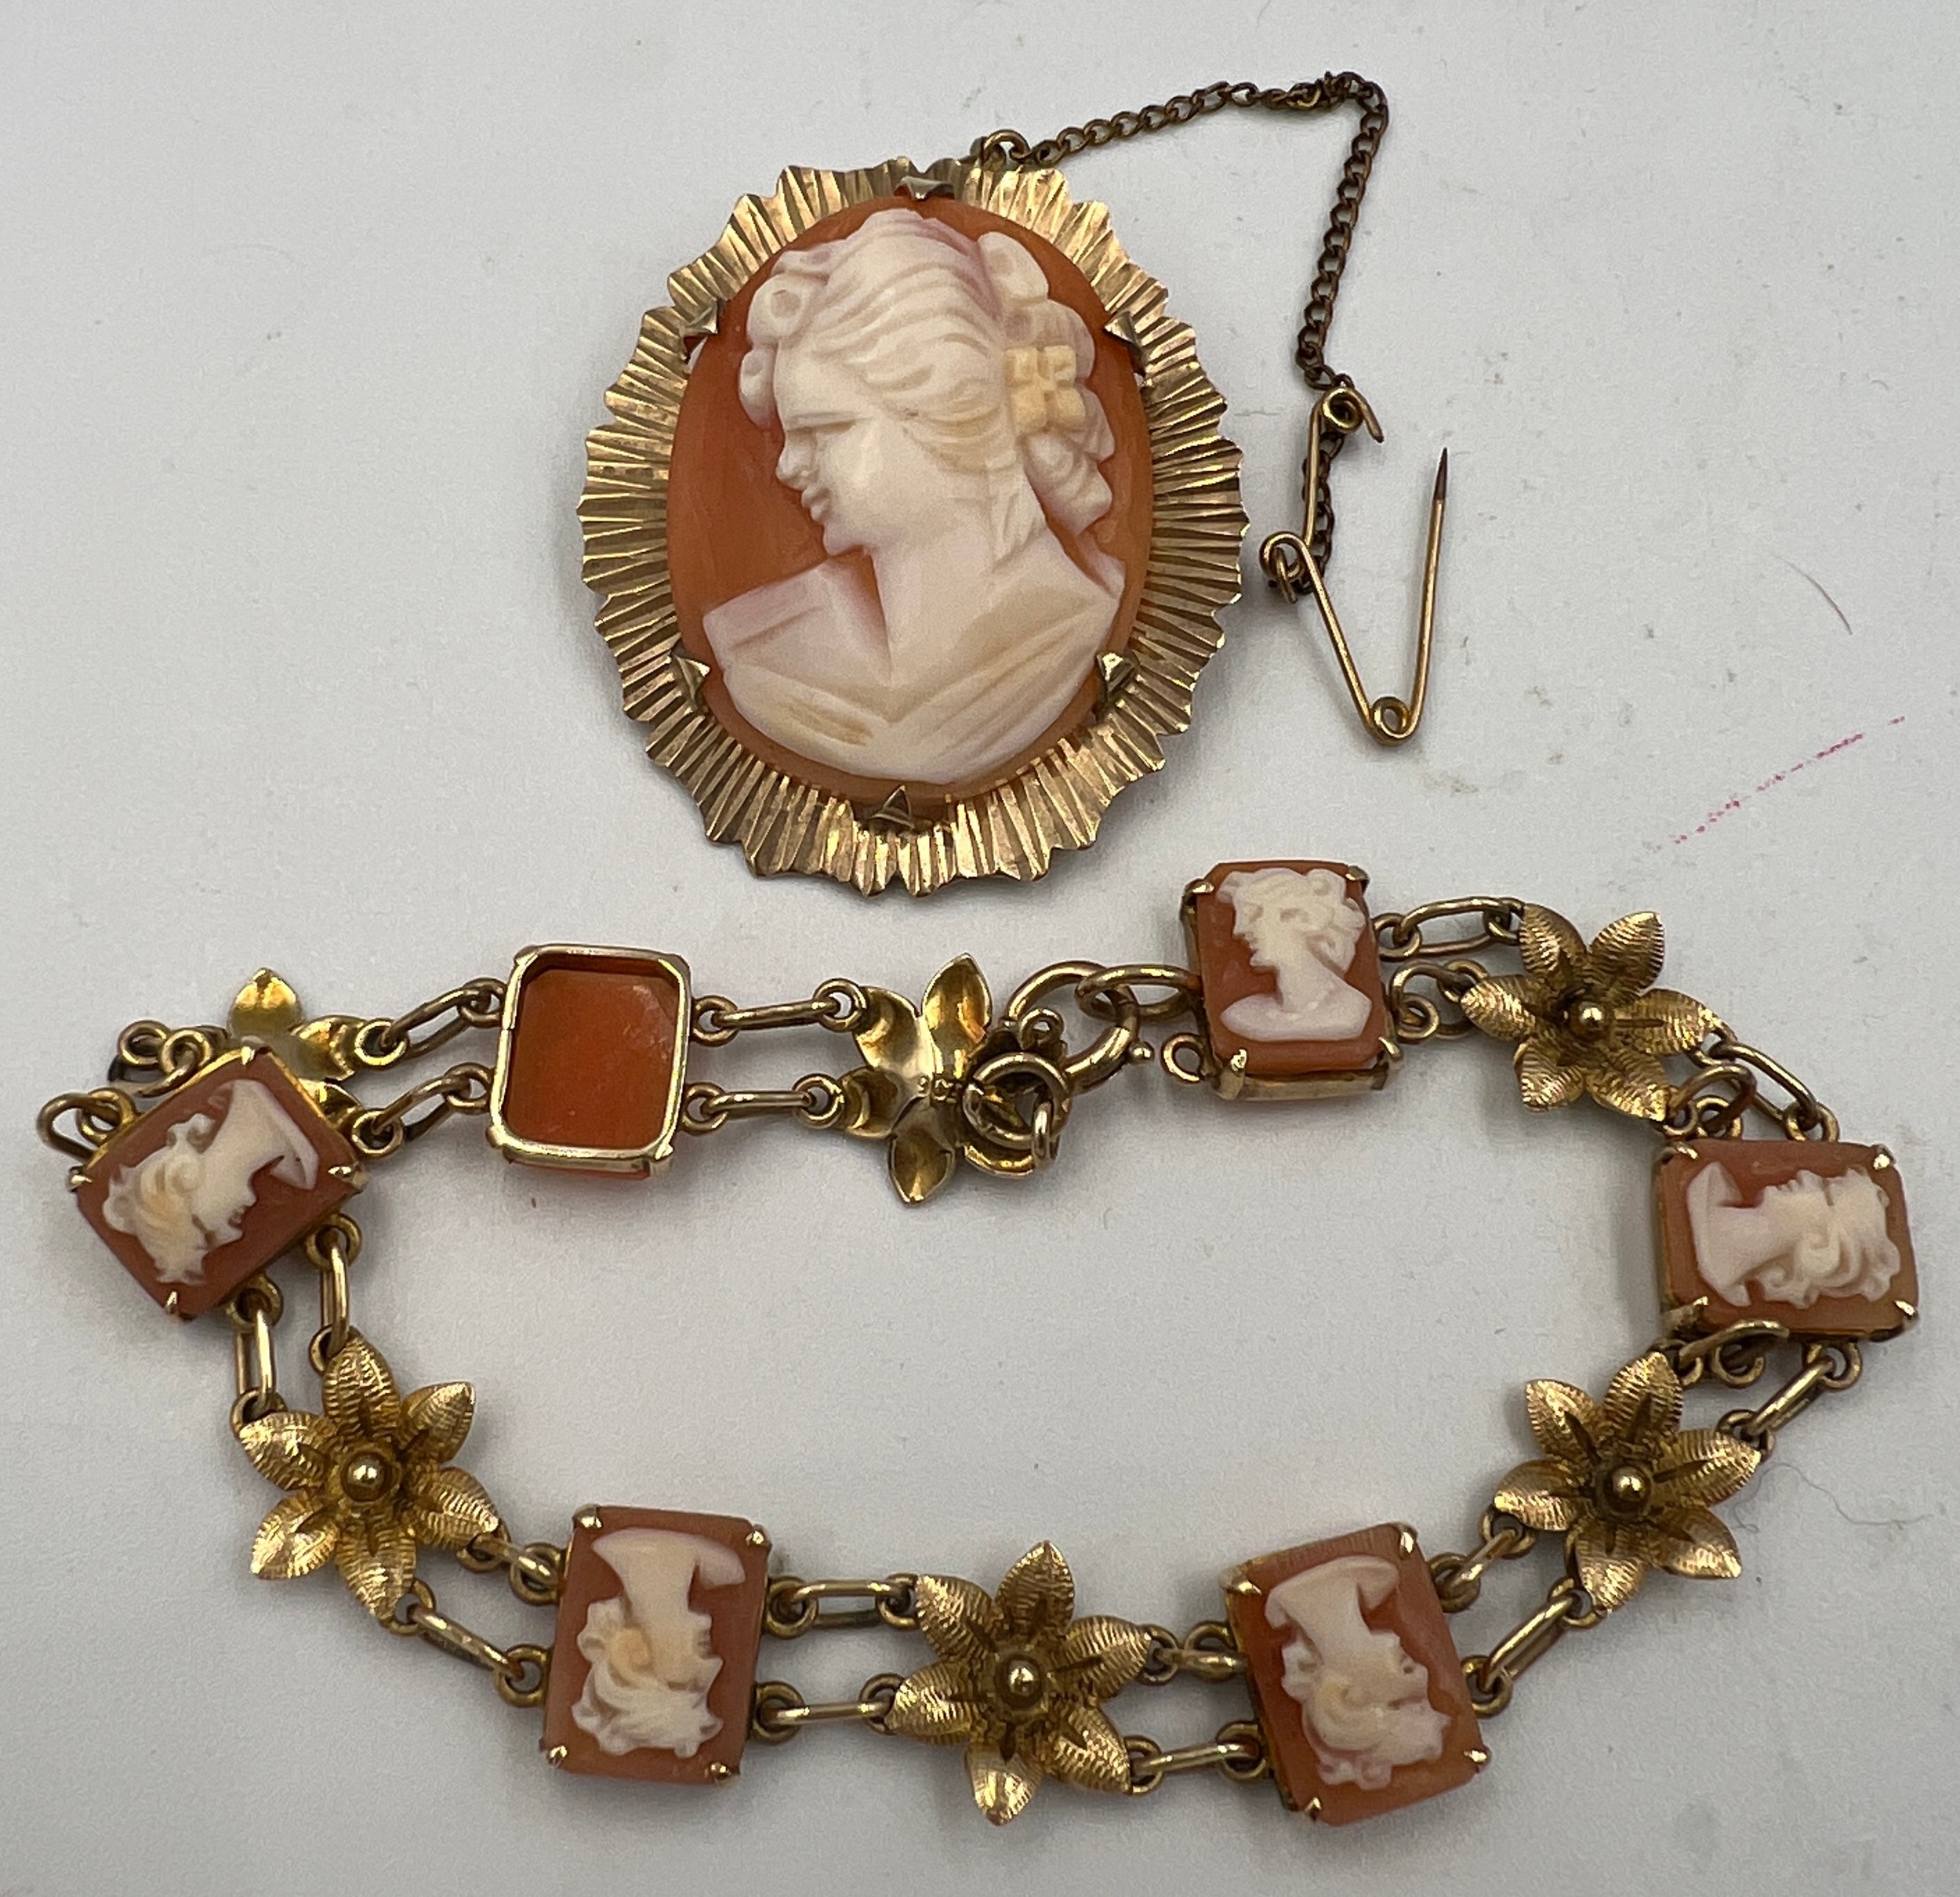 A shell cameo brooch and bracelet mounted in 9 carat yellow gold. Total weight 16.1gm.